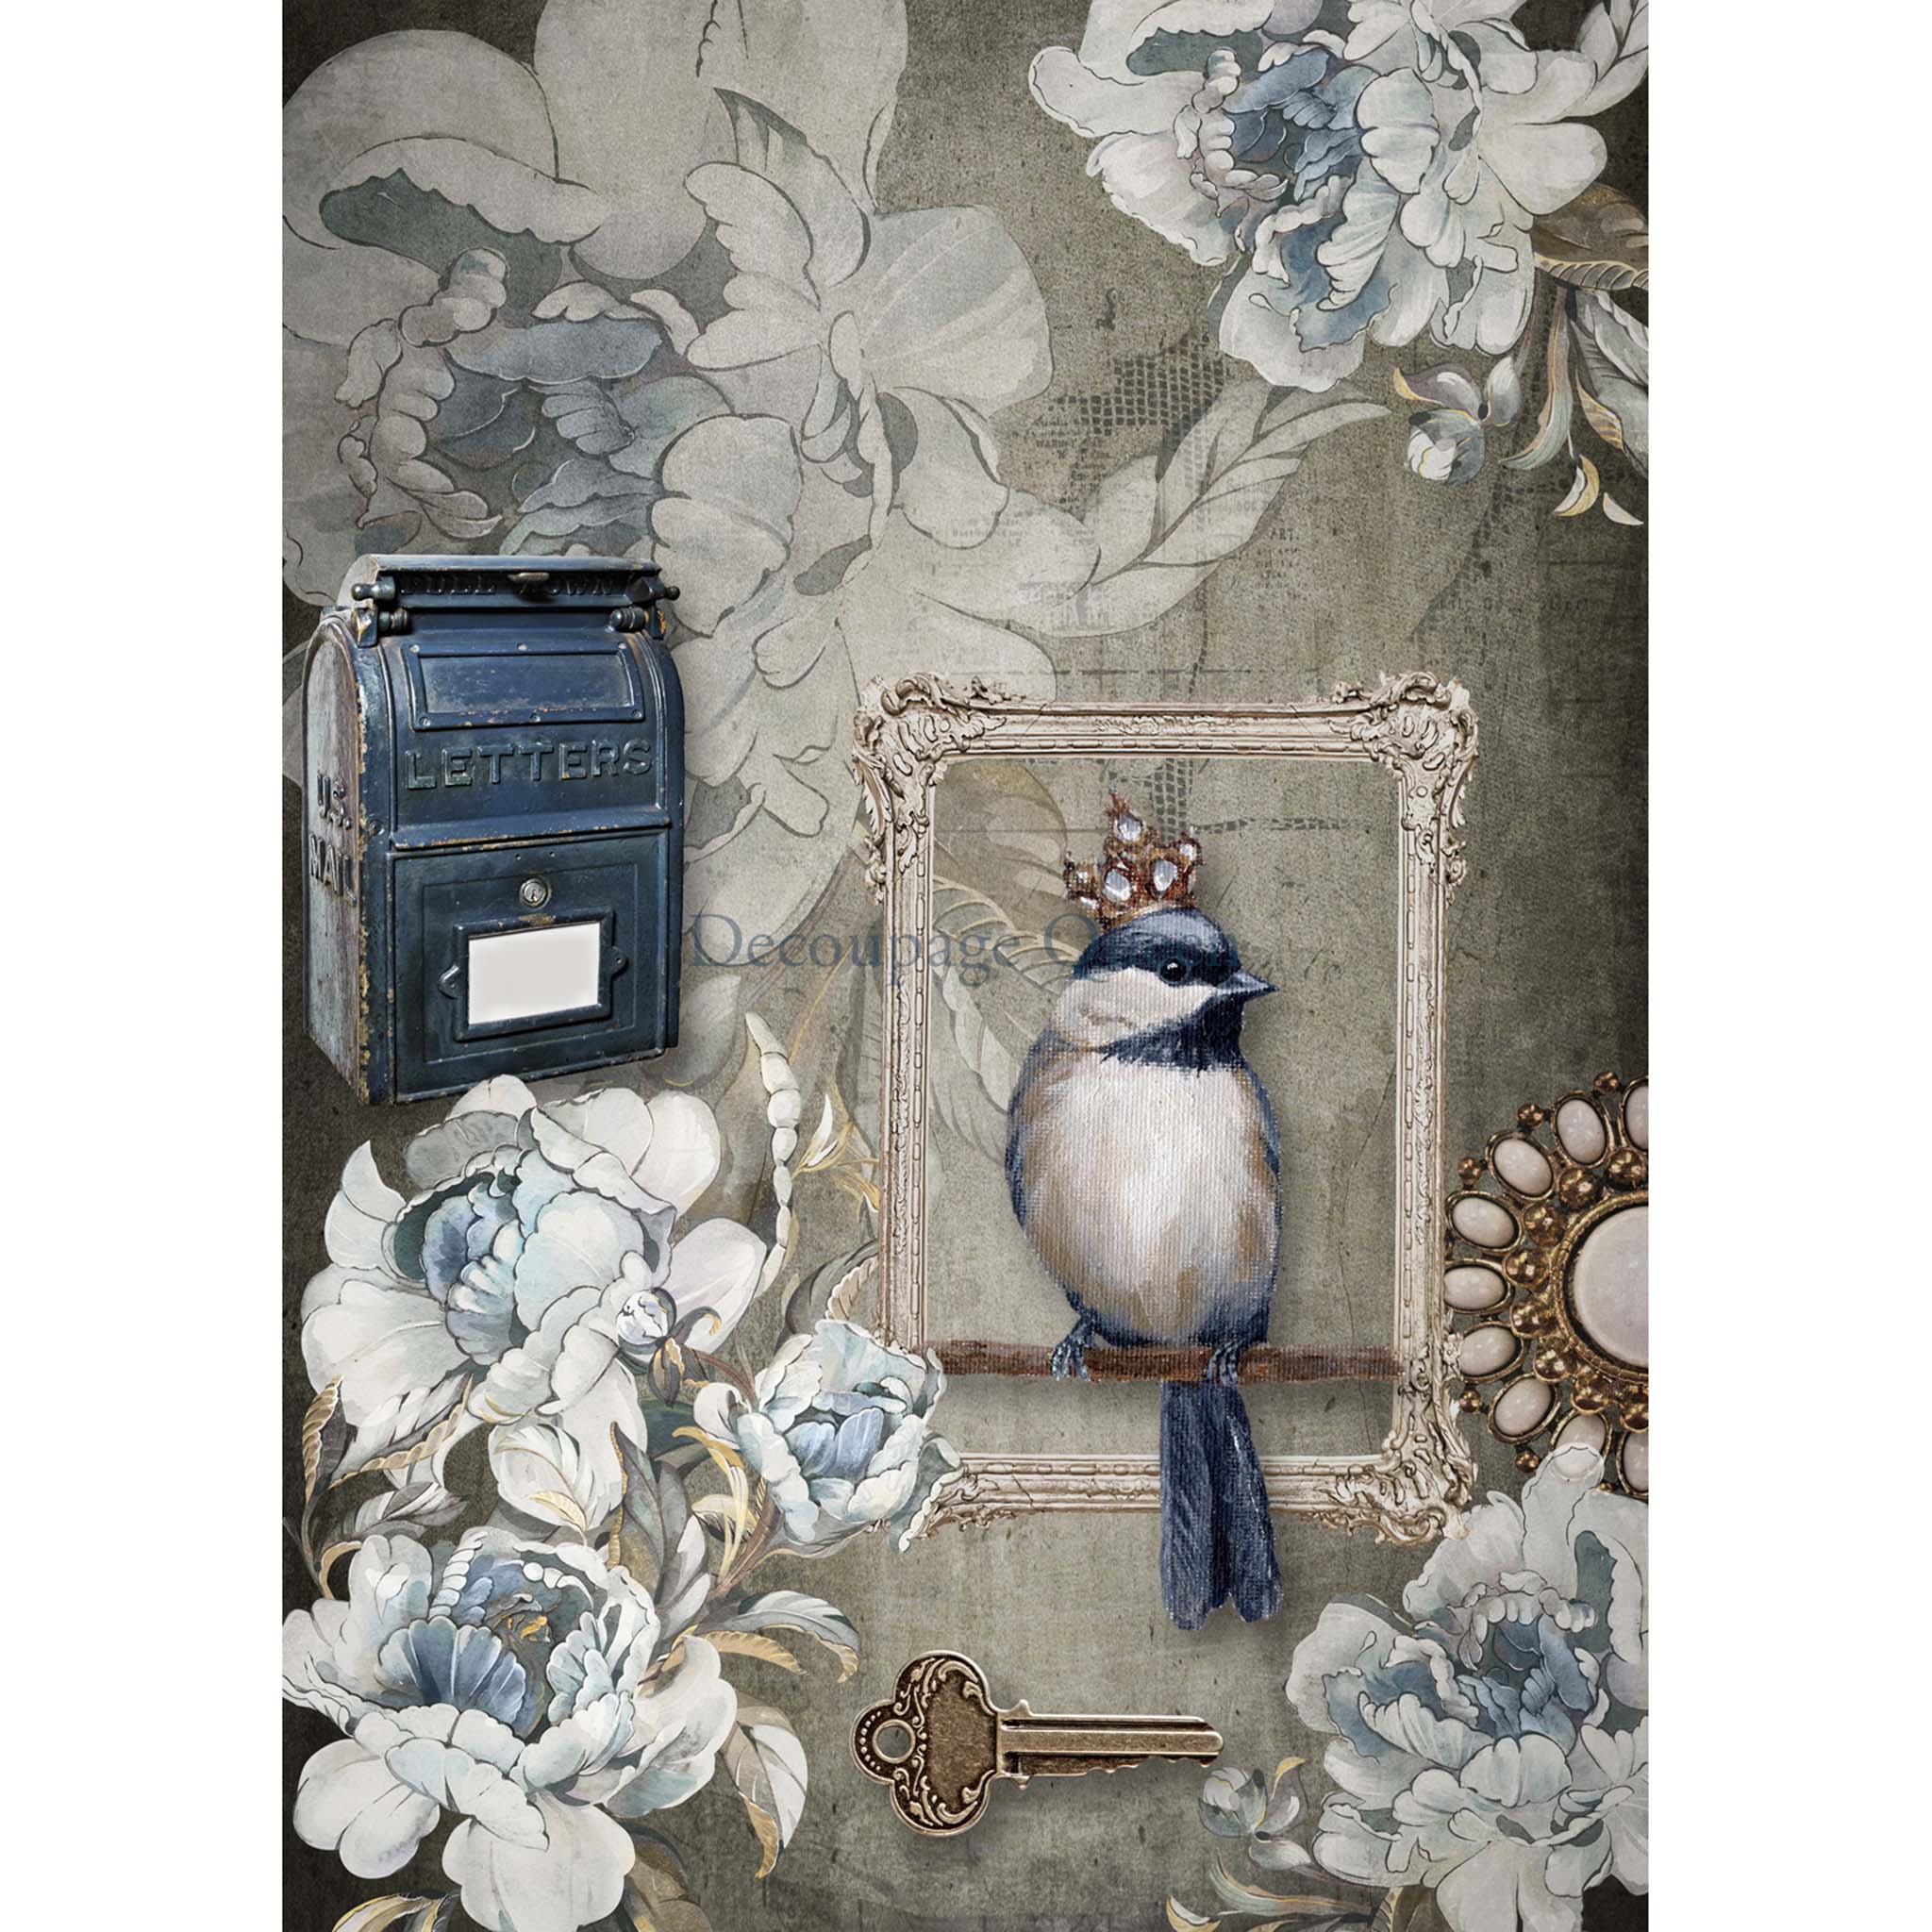 A2 rice paper design that features a distressed background behind a nostalgic mailbox, delicate flowers in white and blue, and a regal bird in a picture frame. White borders are on the sides.